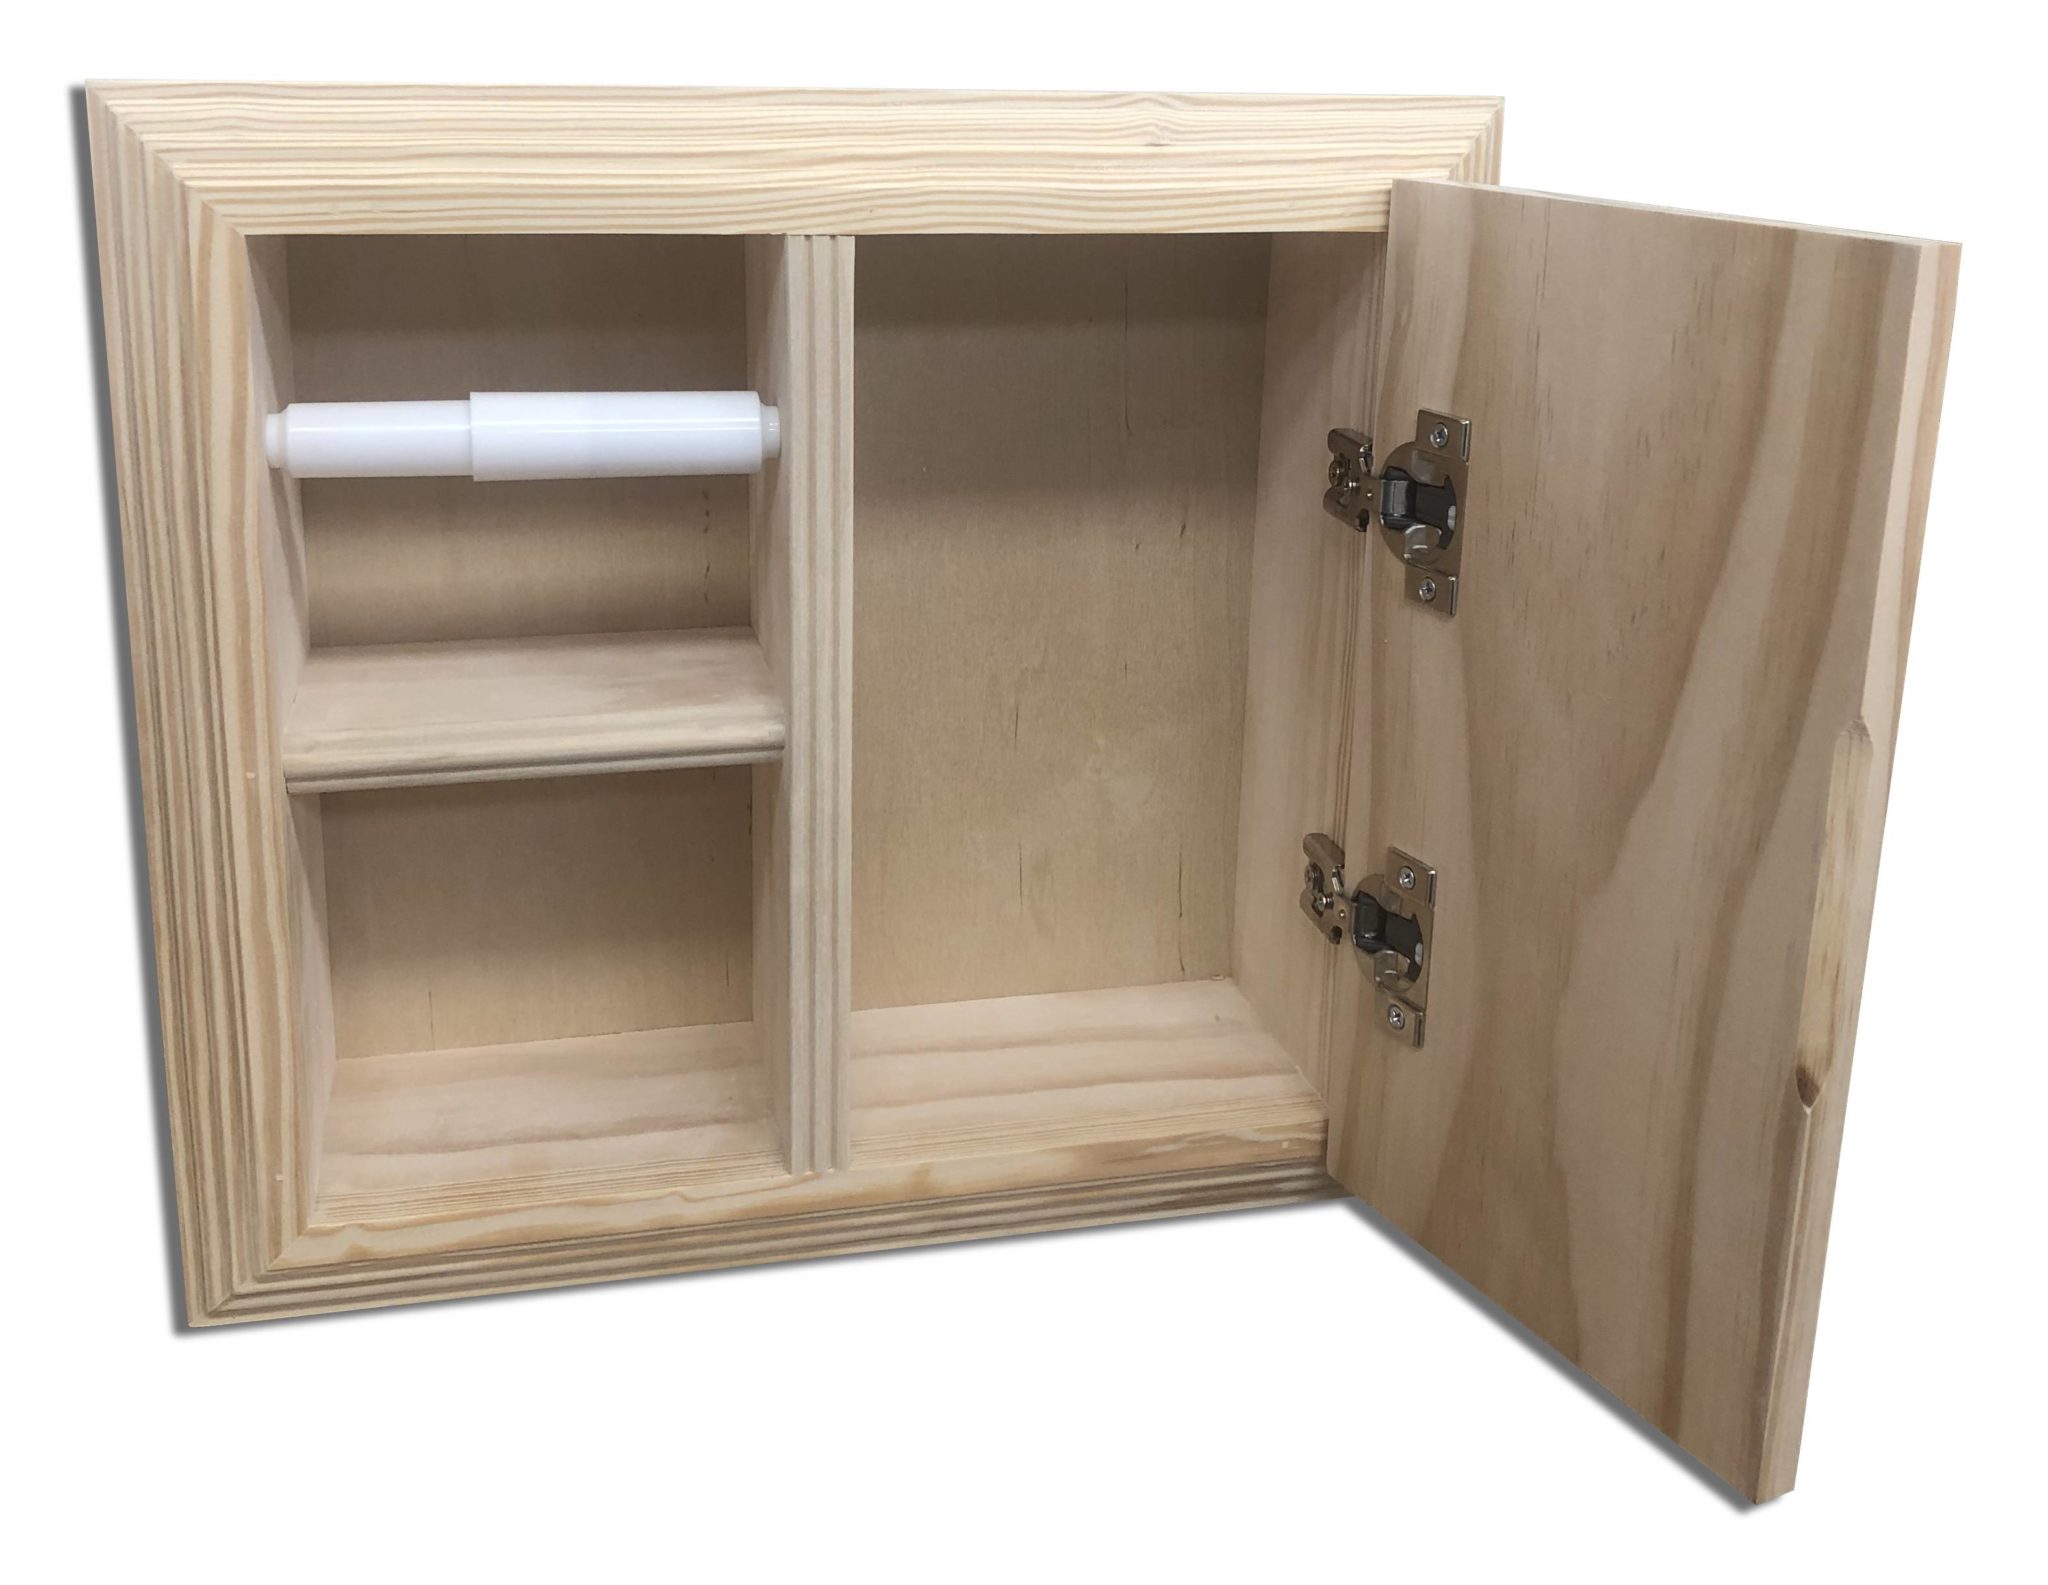 Wall Mount Wood Cabinet Top Cubbies